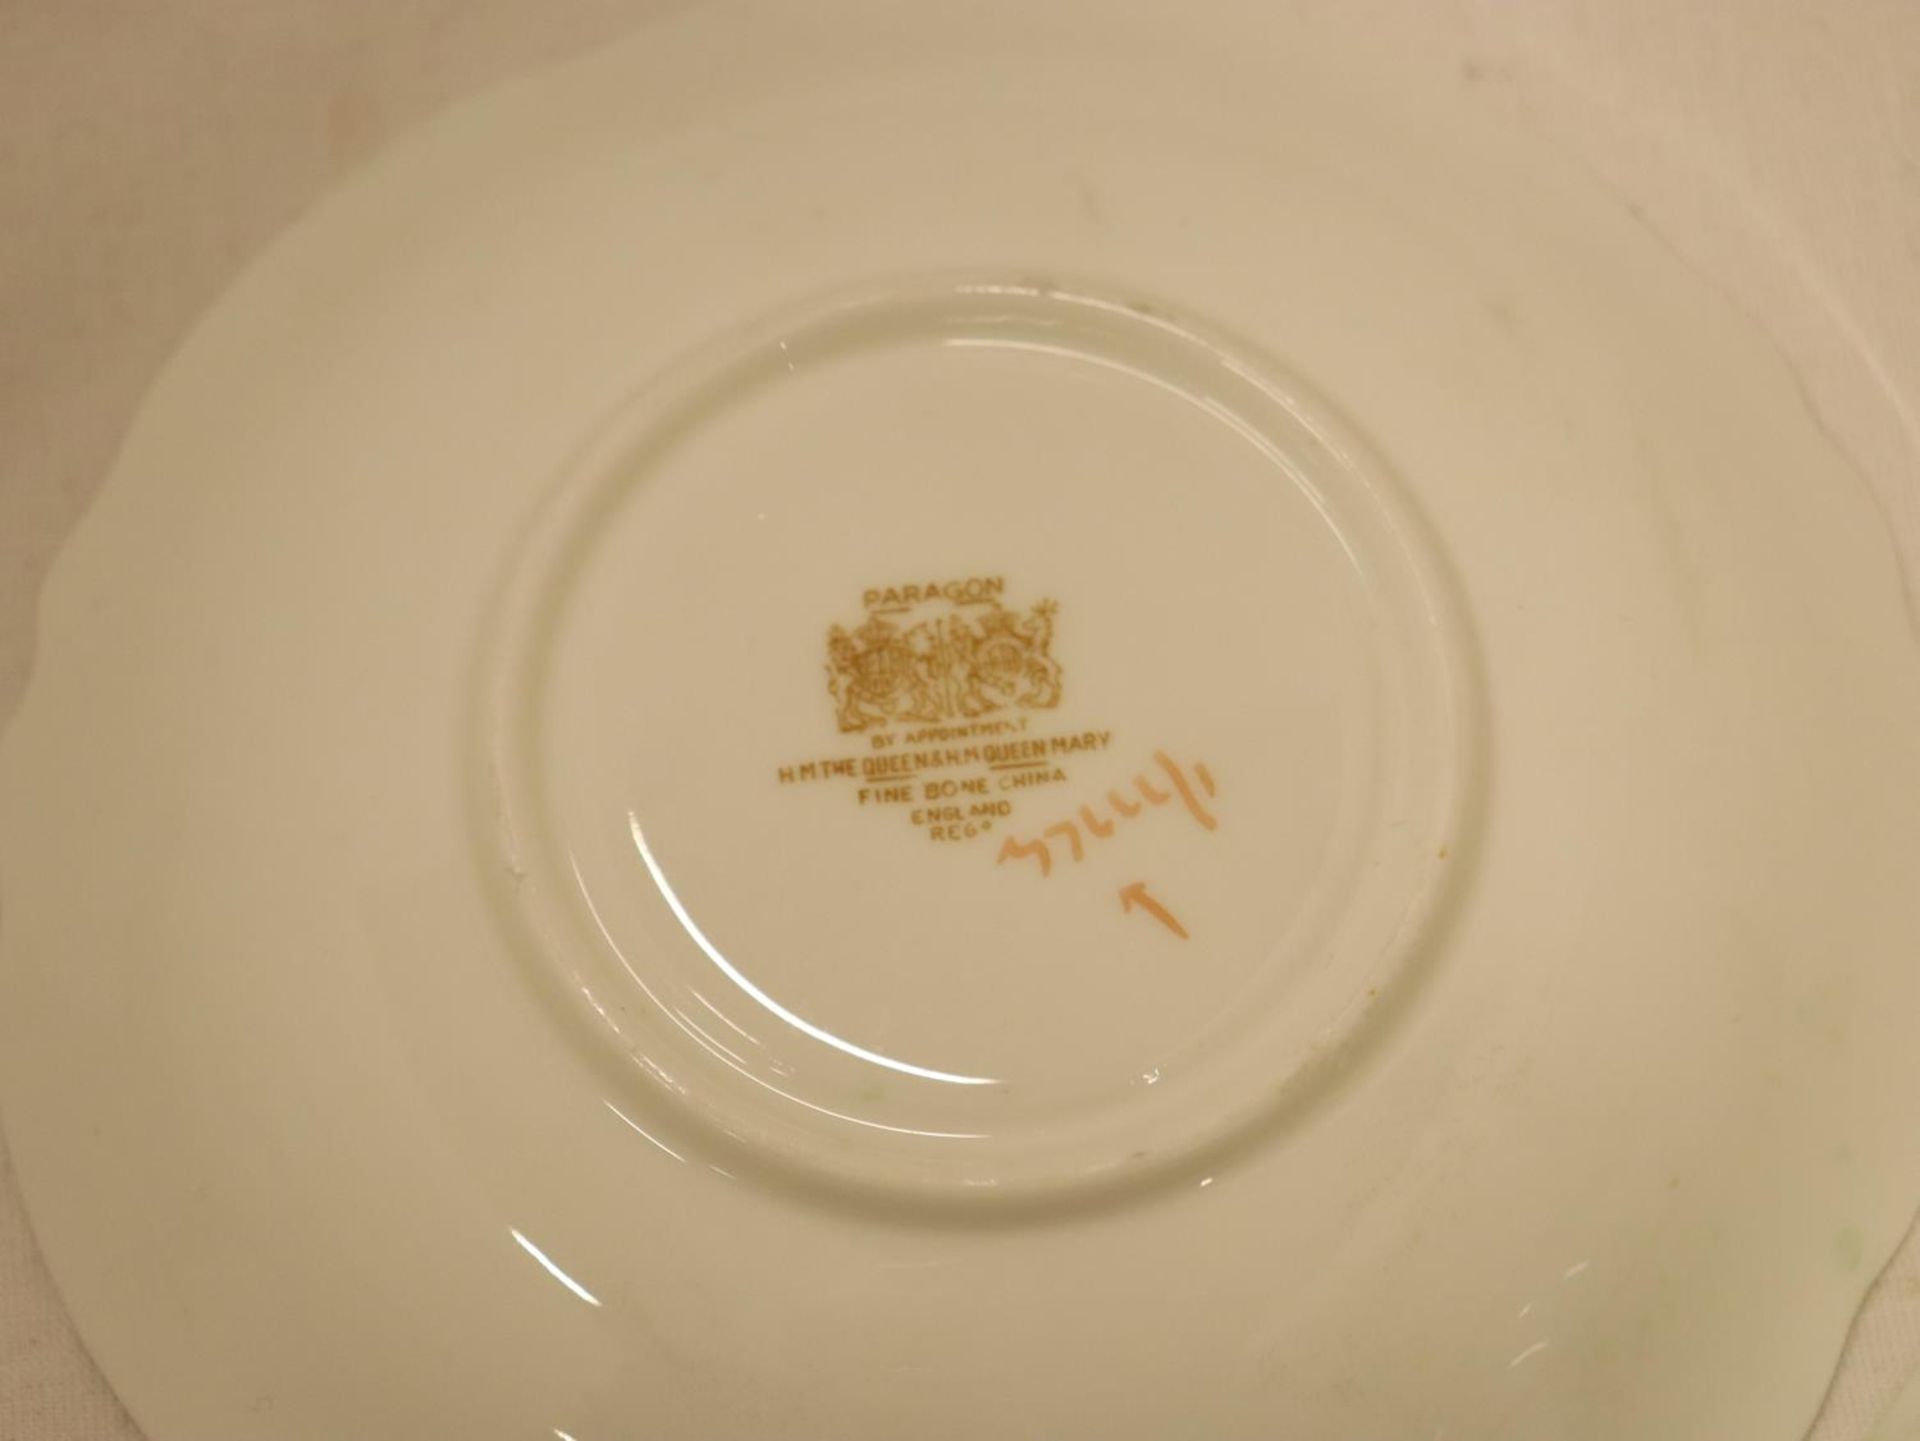 THREE VINTAGE PARAGON CHINA CUPS AND SAUCERS - Image 5 of 5